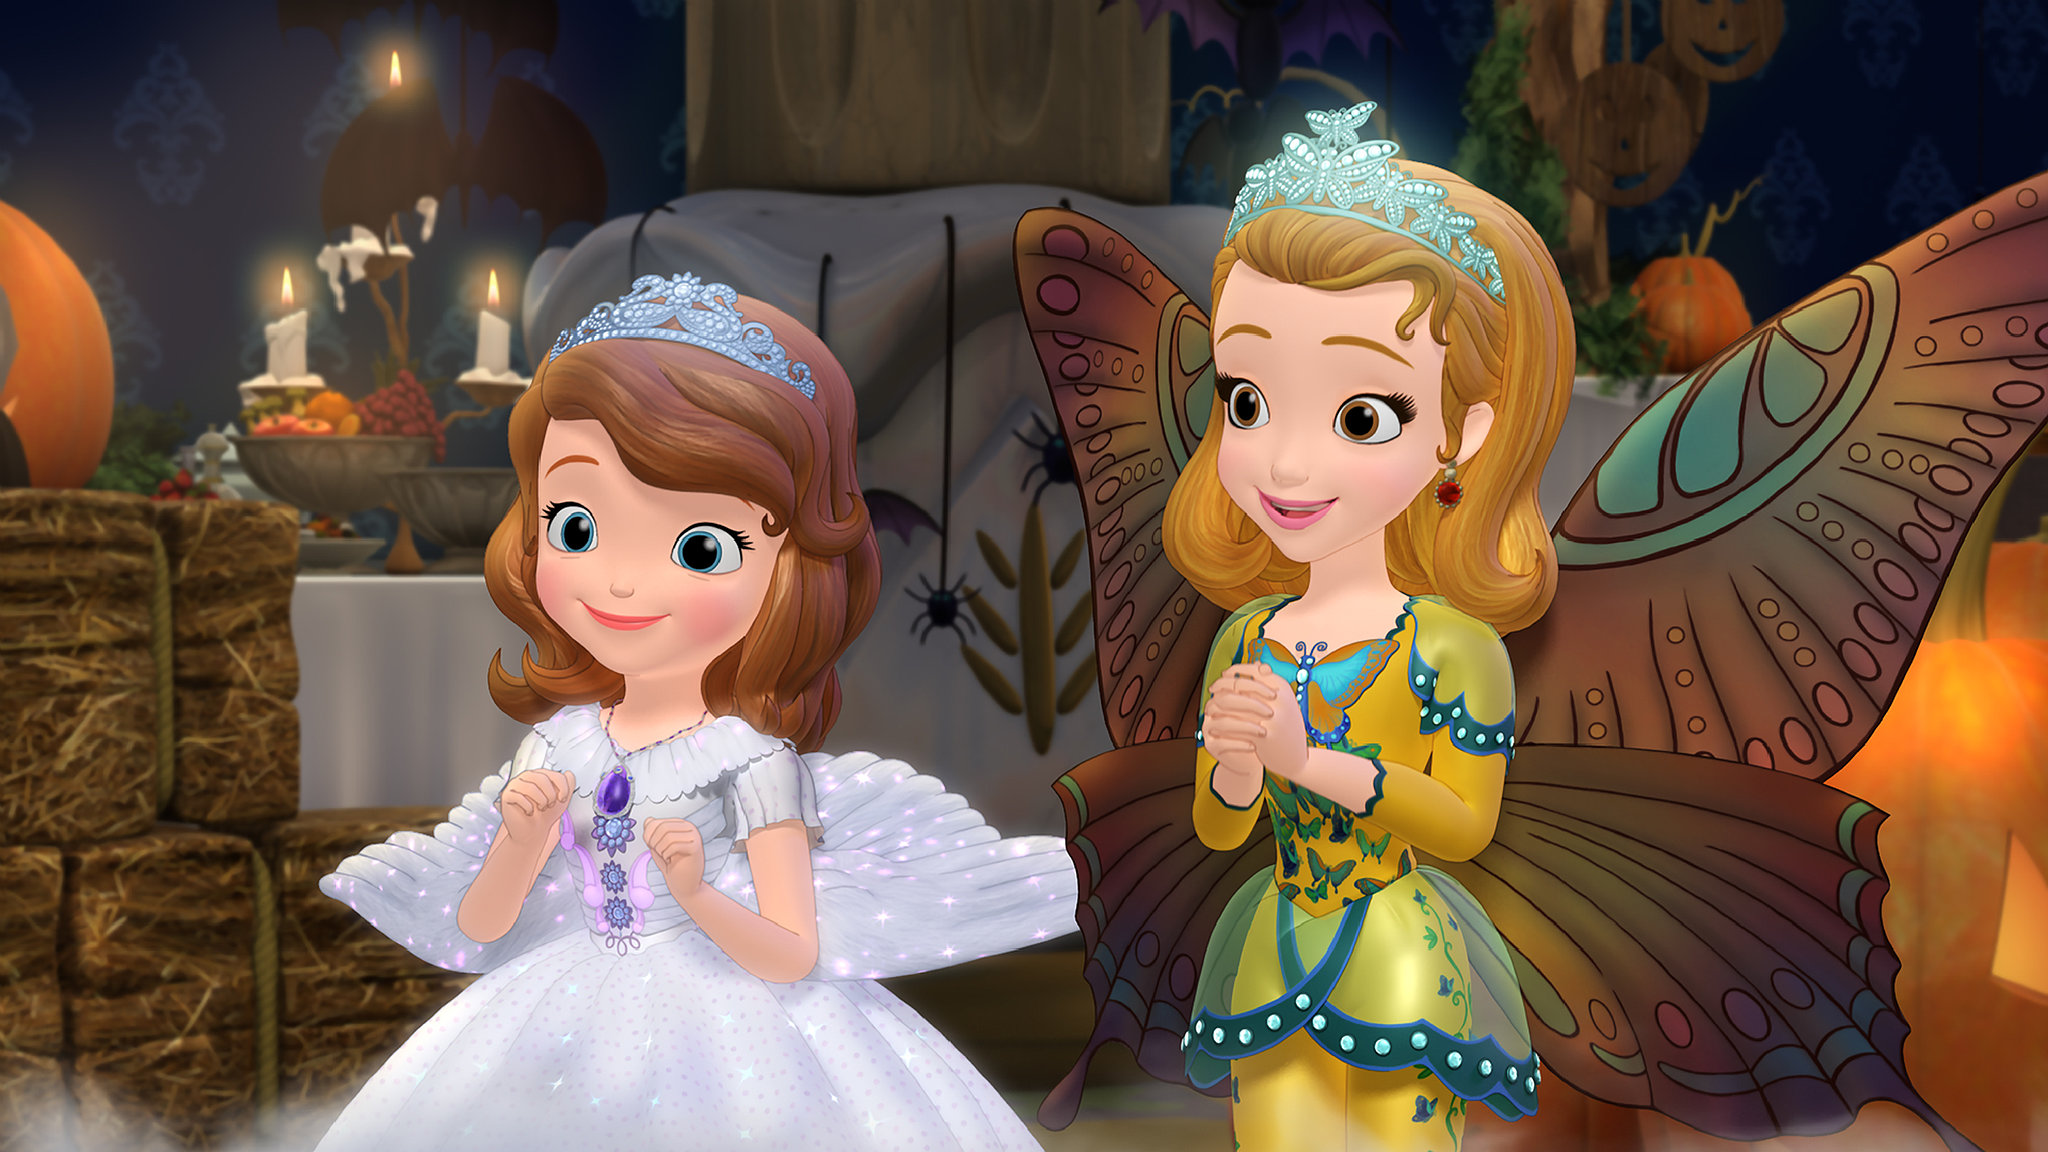 Sofia the First BooTube! Kids' Halloween Episodes and Specials to